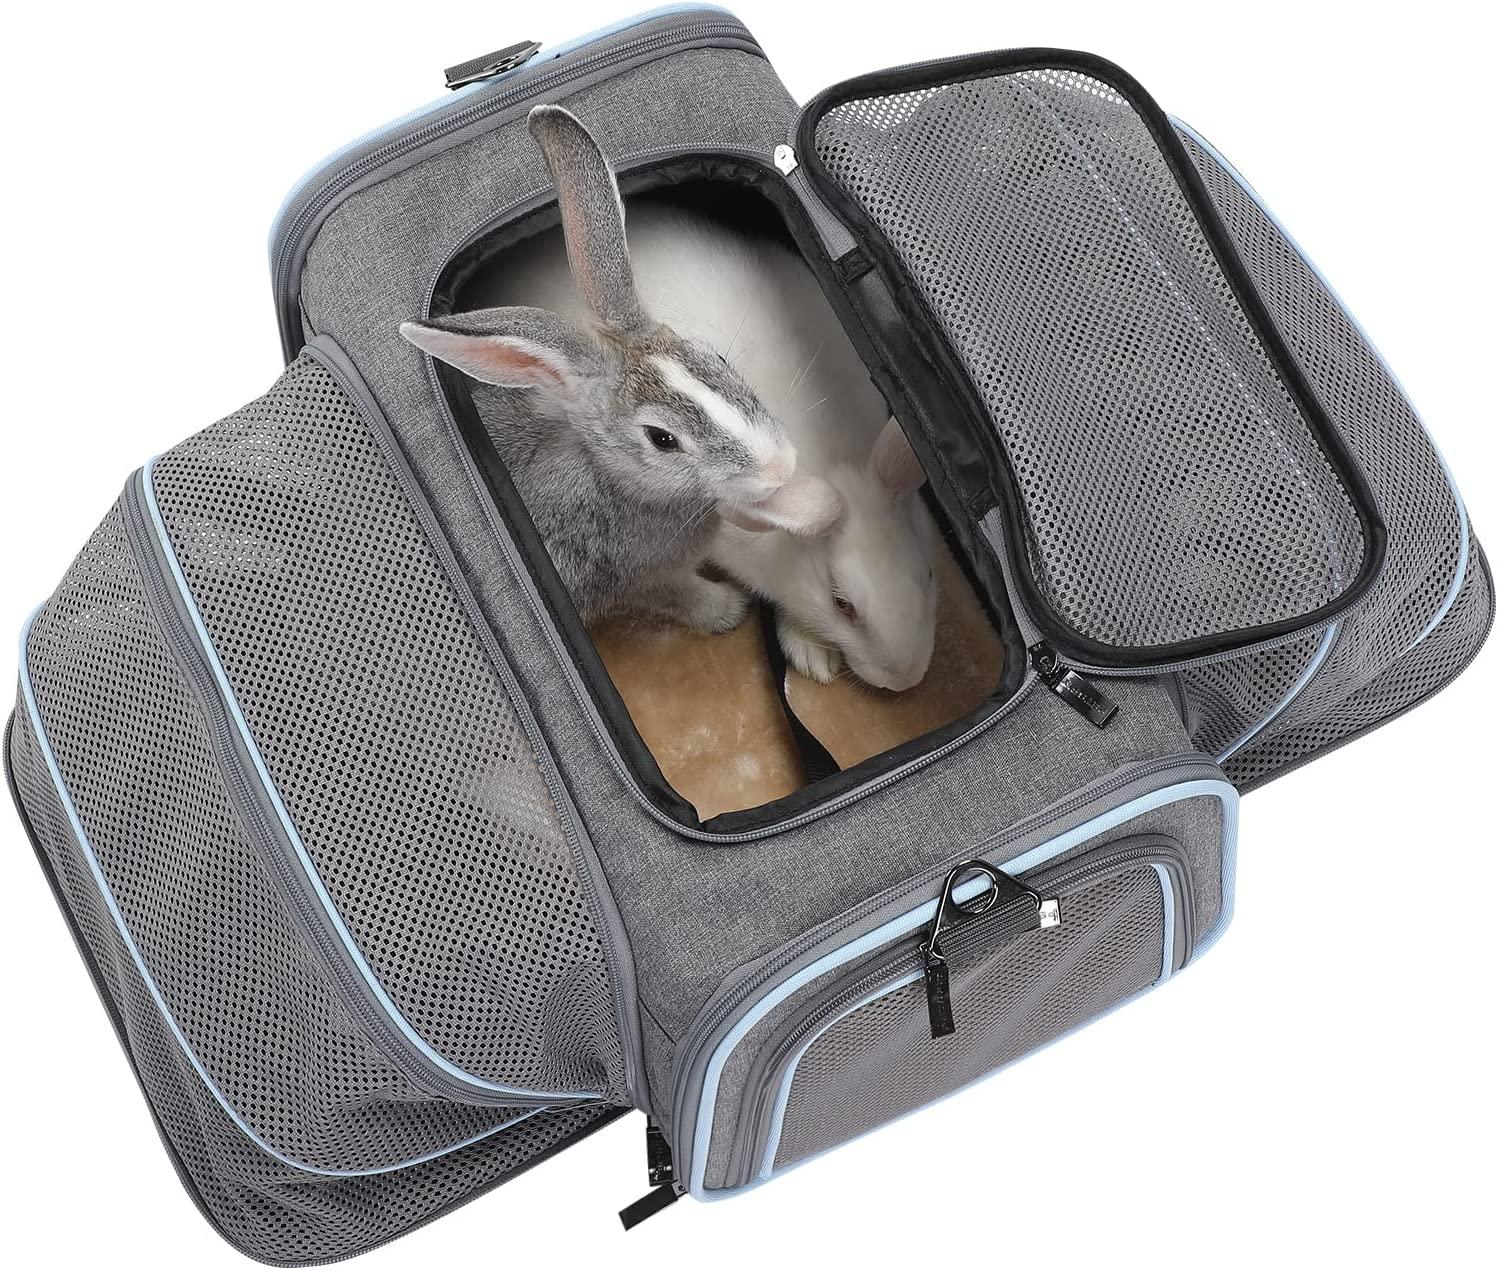 Airline Approved Cat Carrier for Small Dogs,Expandable Pet Carrier